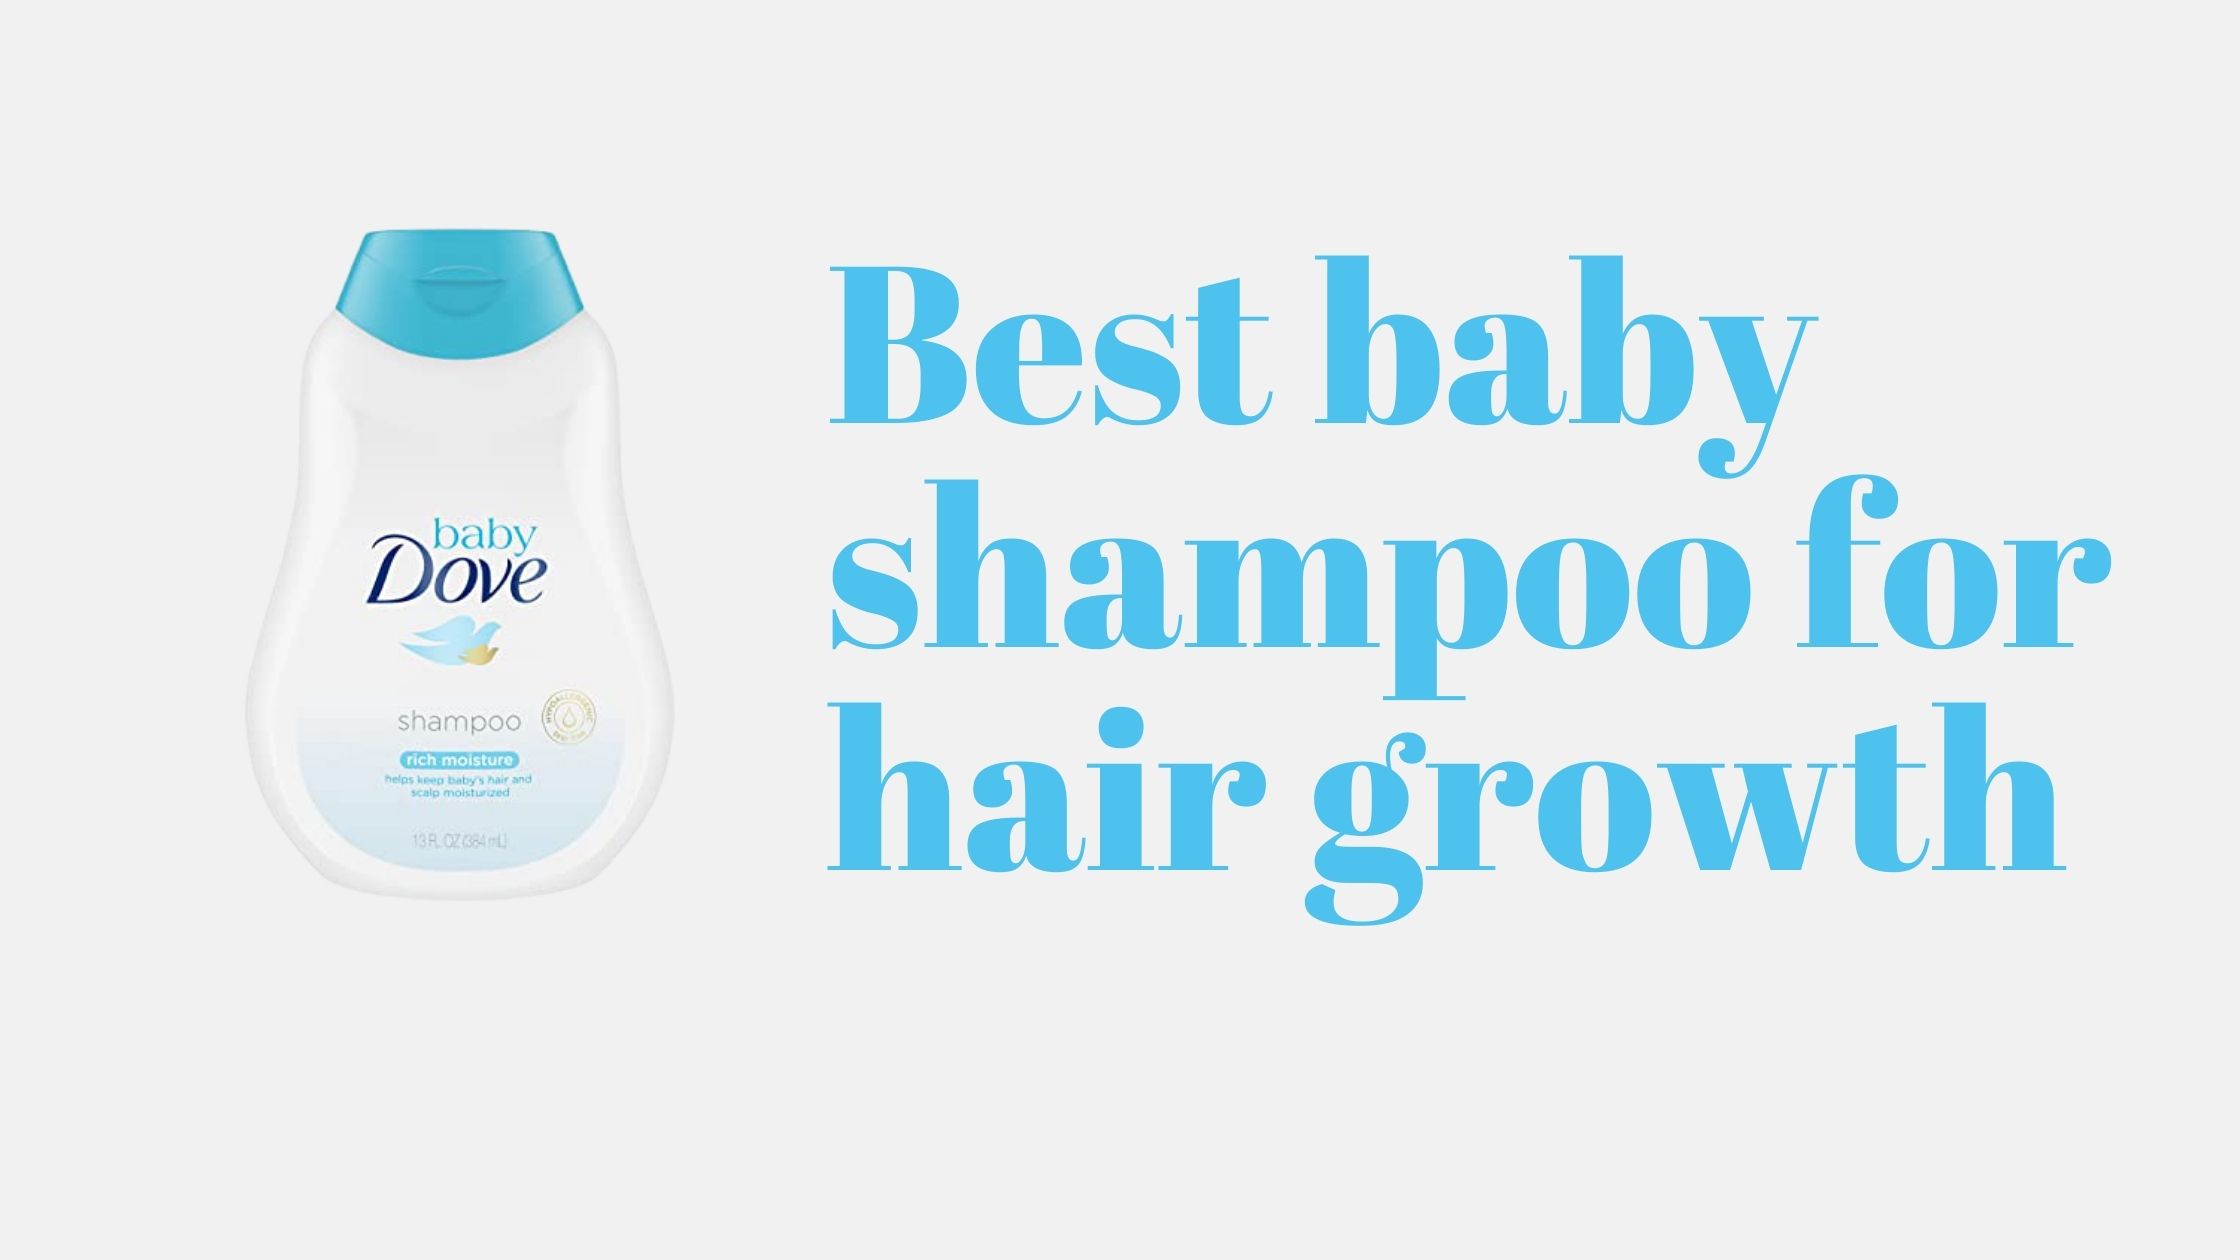 13 Best Baby Shampoo for Hair Growth